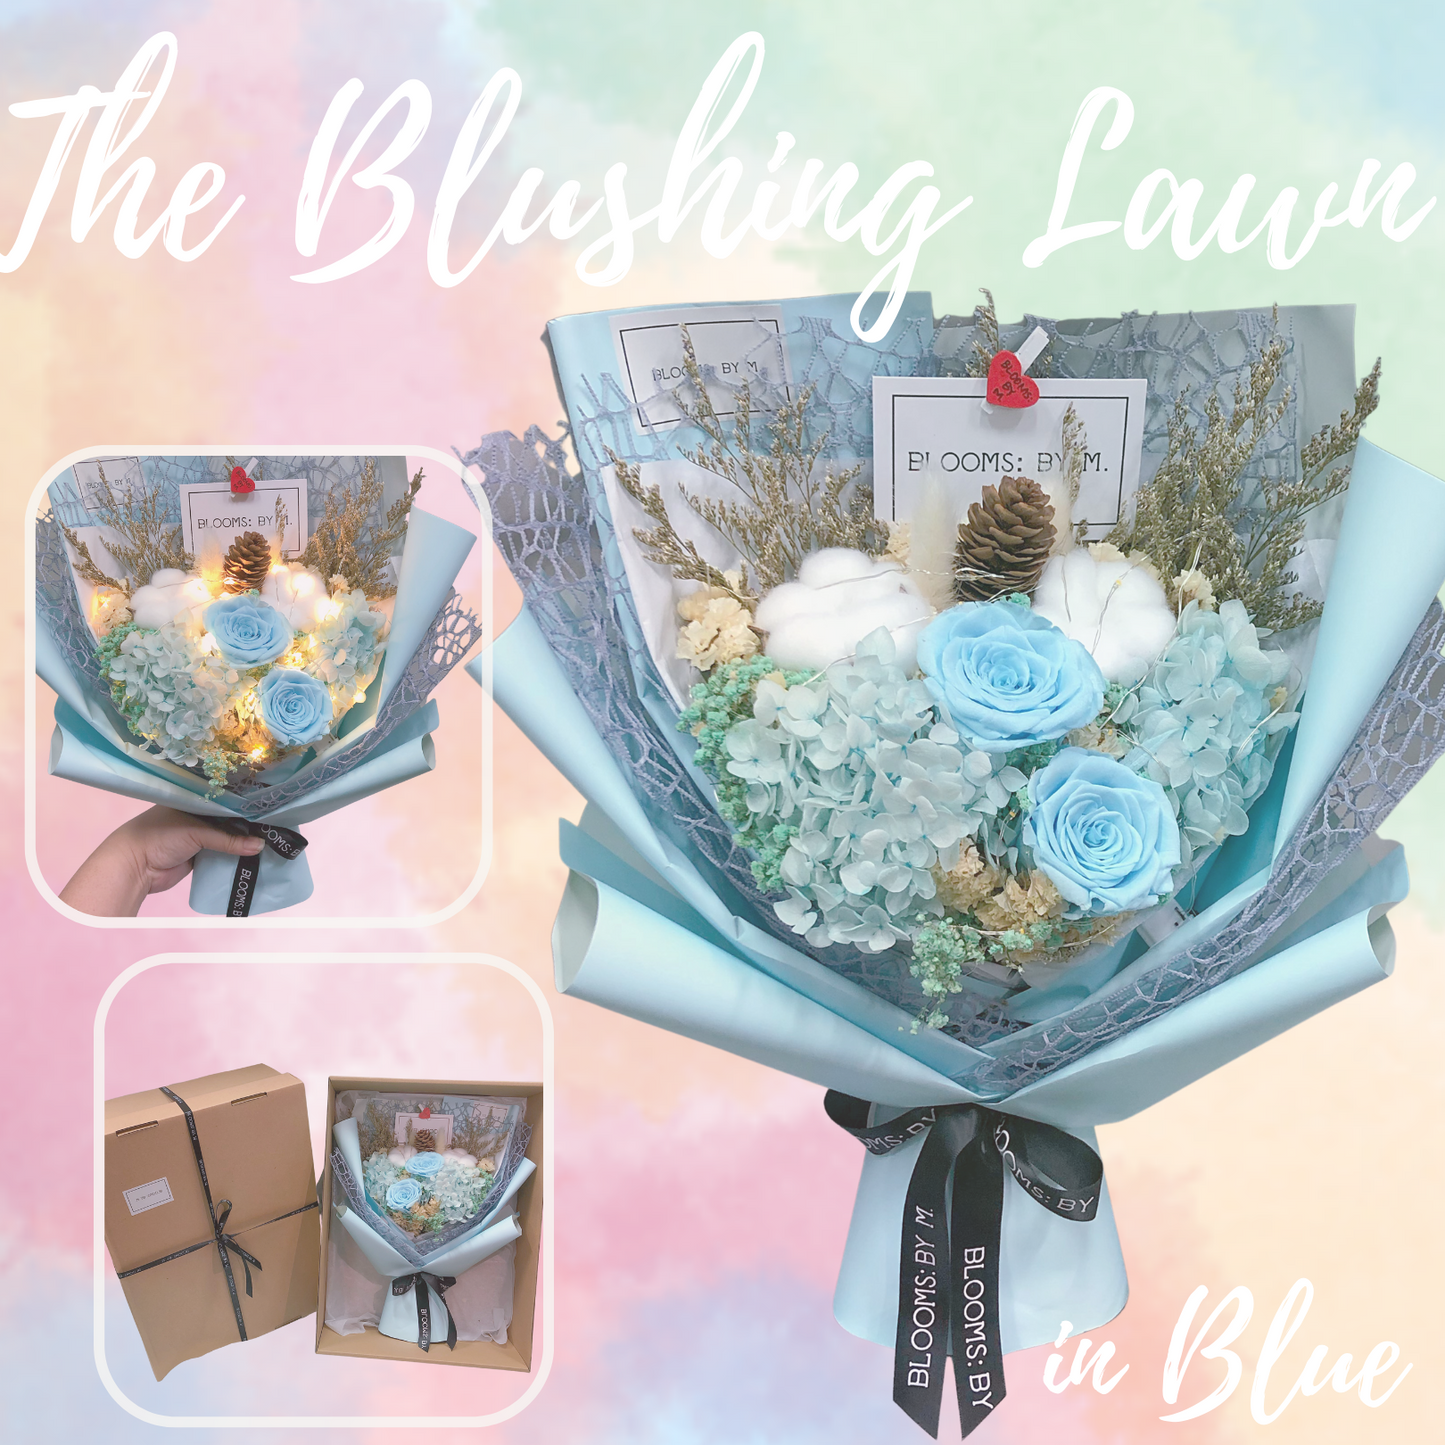 Preserved Rose Flower Bouquet Box - The Blushing Lawn (Premium) in Blue